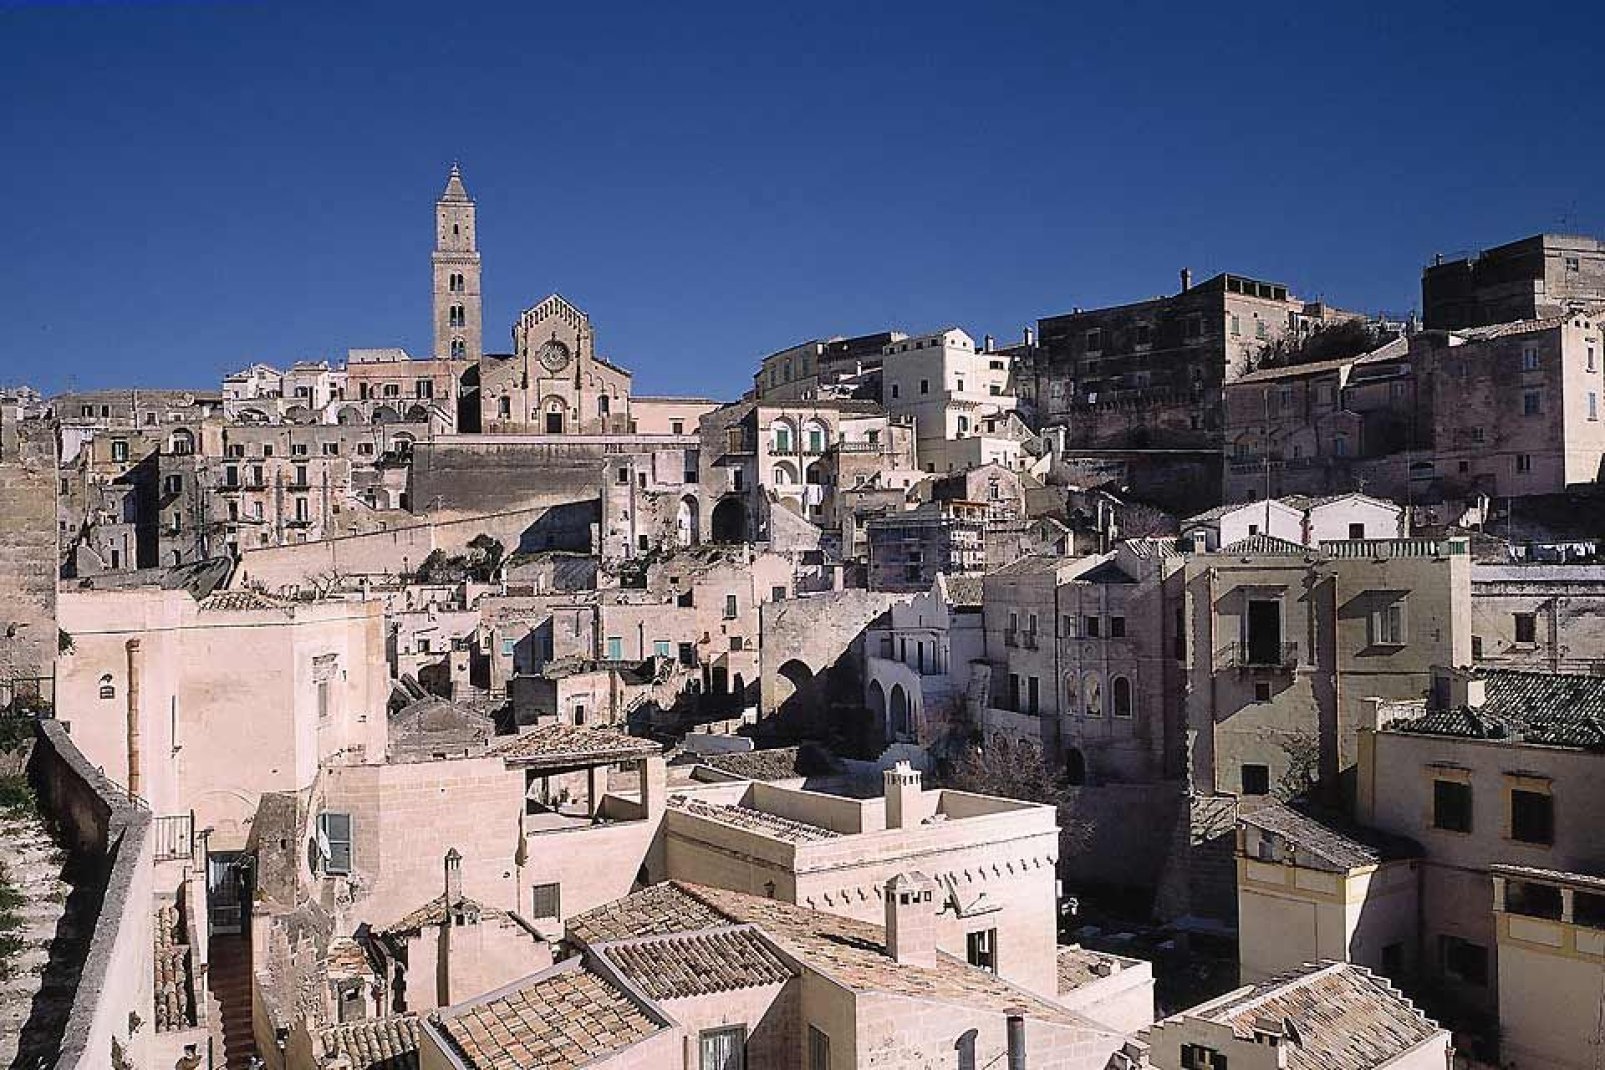 Matera has an ancient history that dates back to the Paleolithic age: each and every era has left its mark on this extraordinary town.